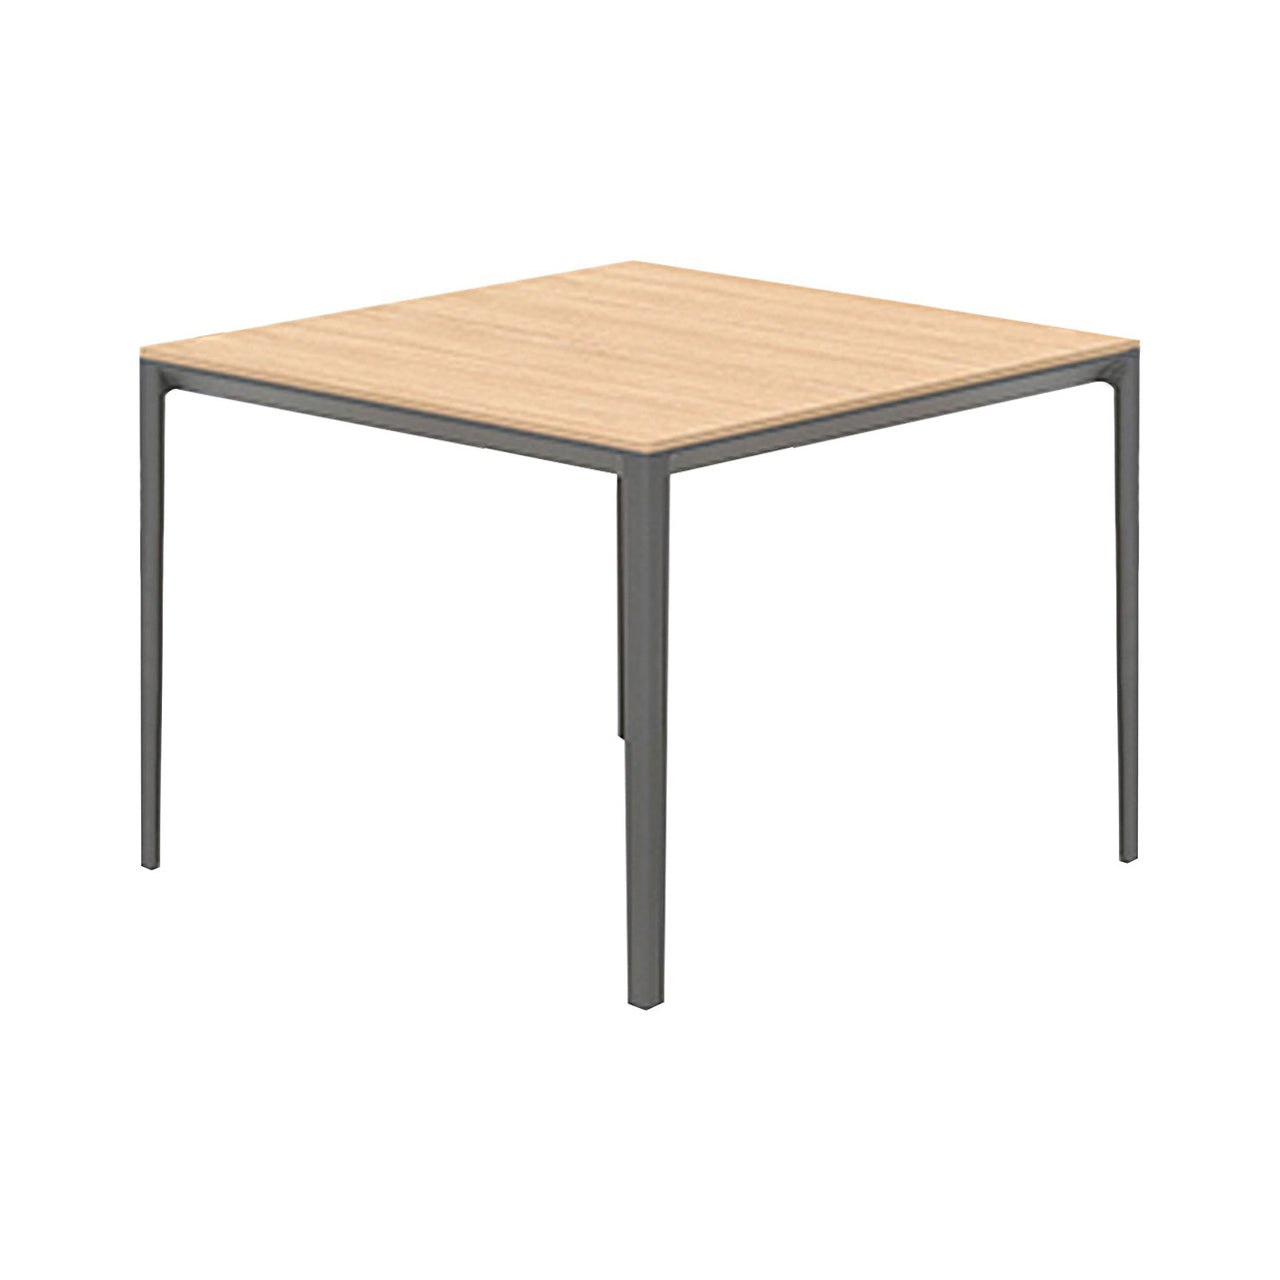 Able Dining Table: Square + Oak